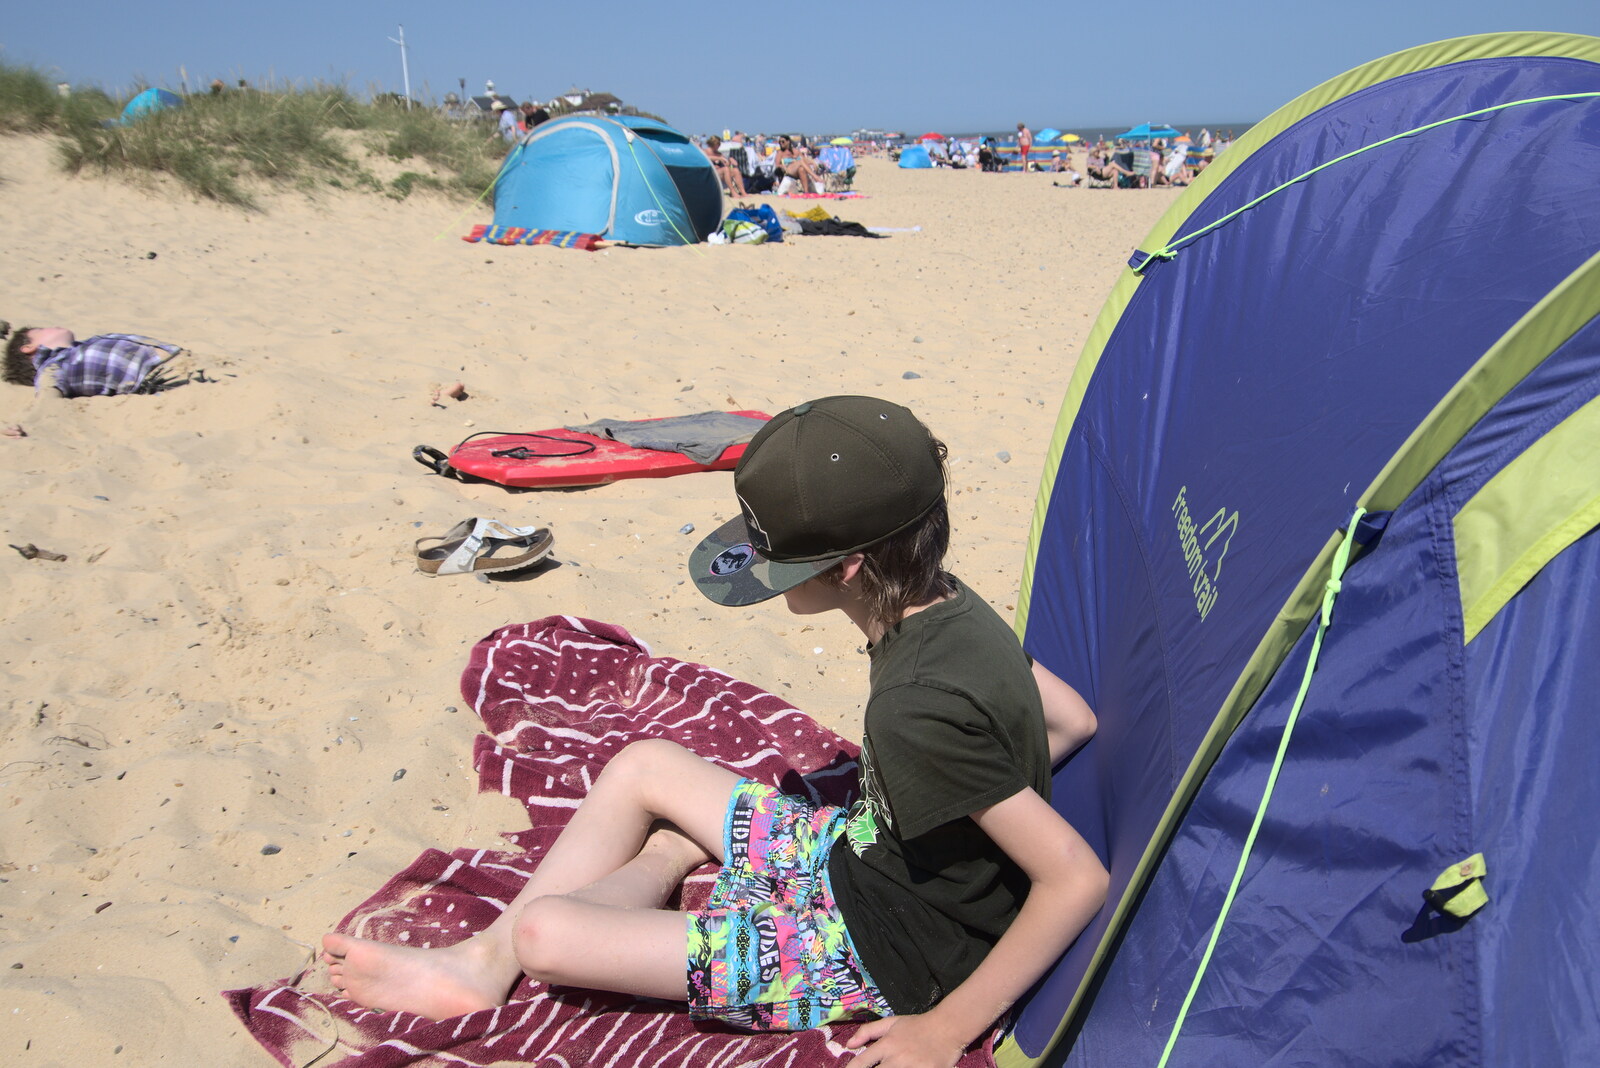 Harry by the pop-up tent from A Day on the Beach, Southwold, Suffolk - 18th July 2021